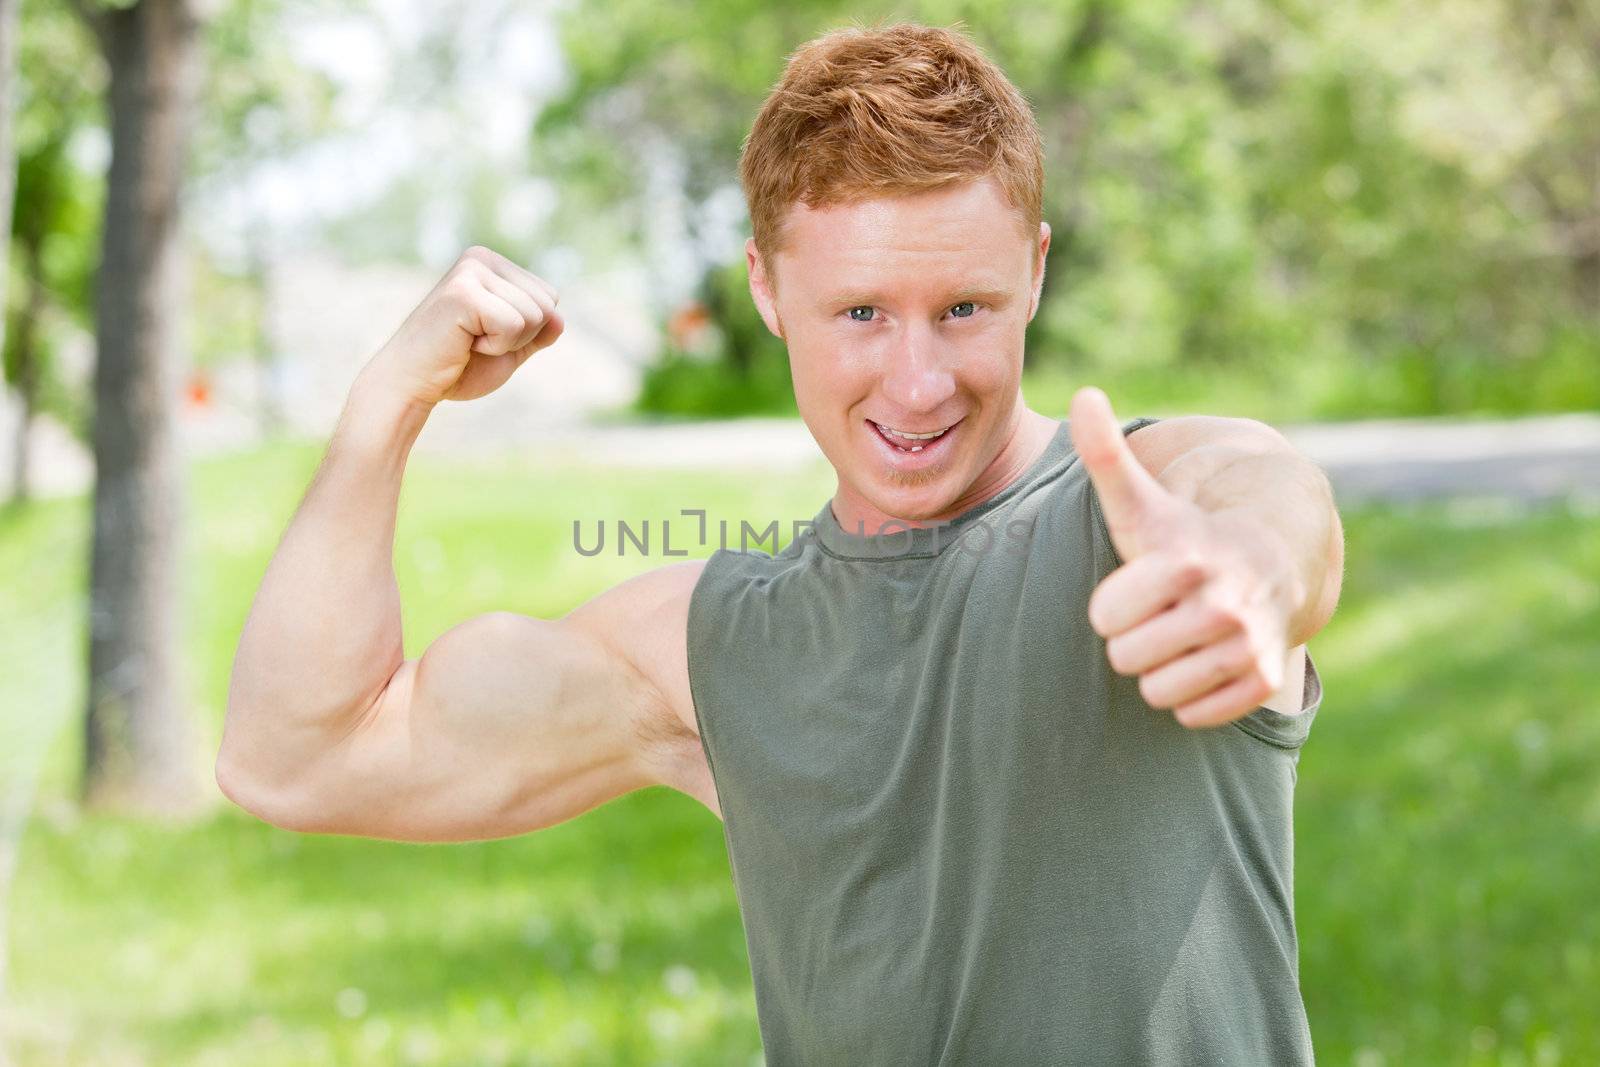 Handsome man showing thumbs up sign while flexing